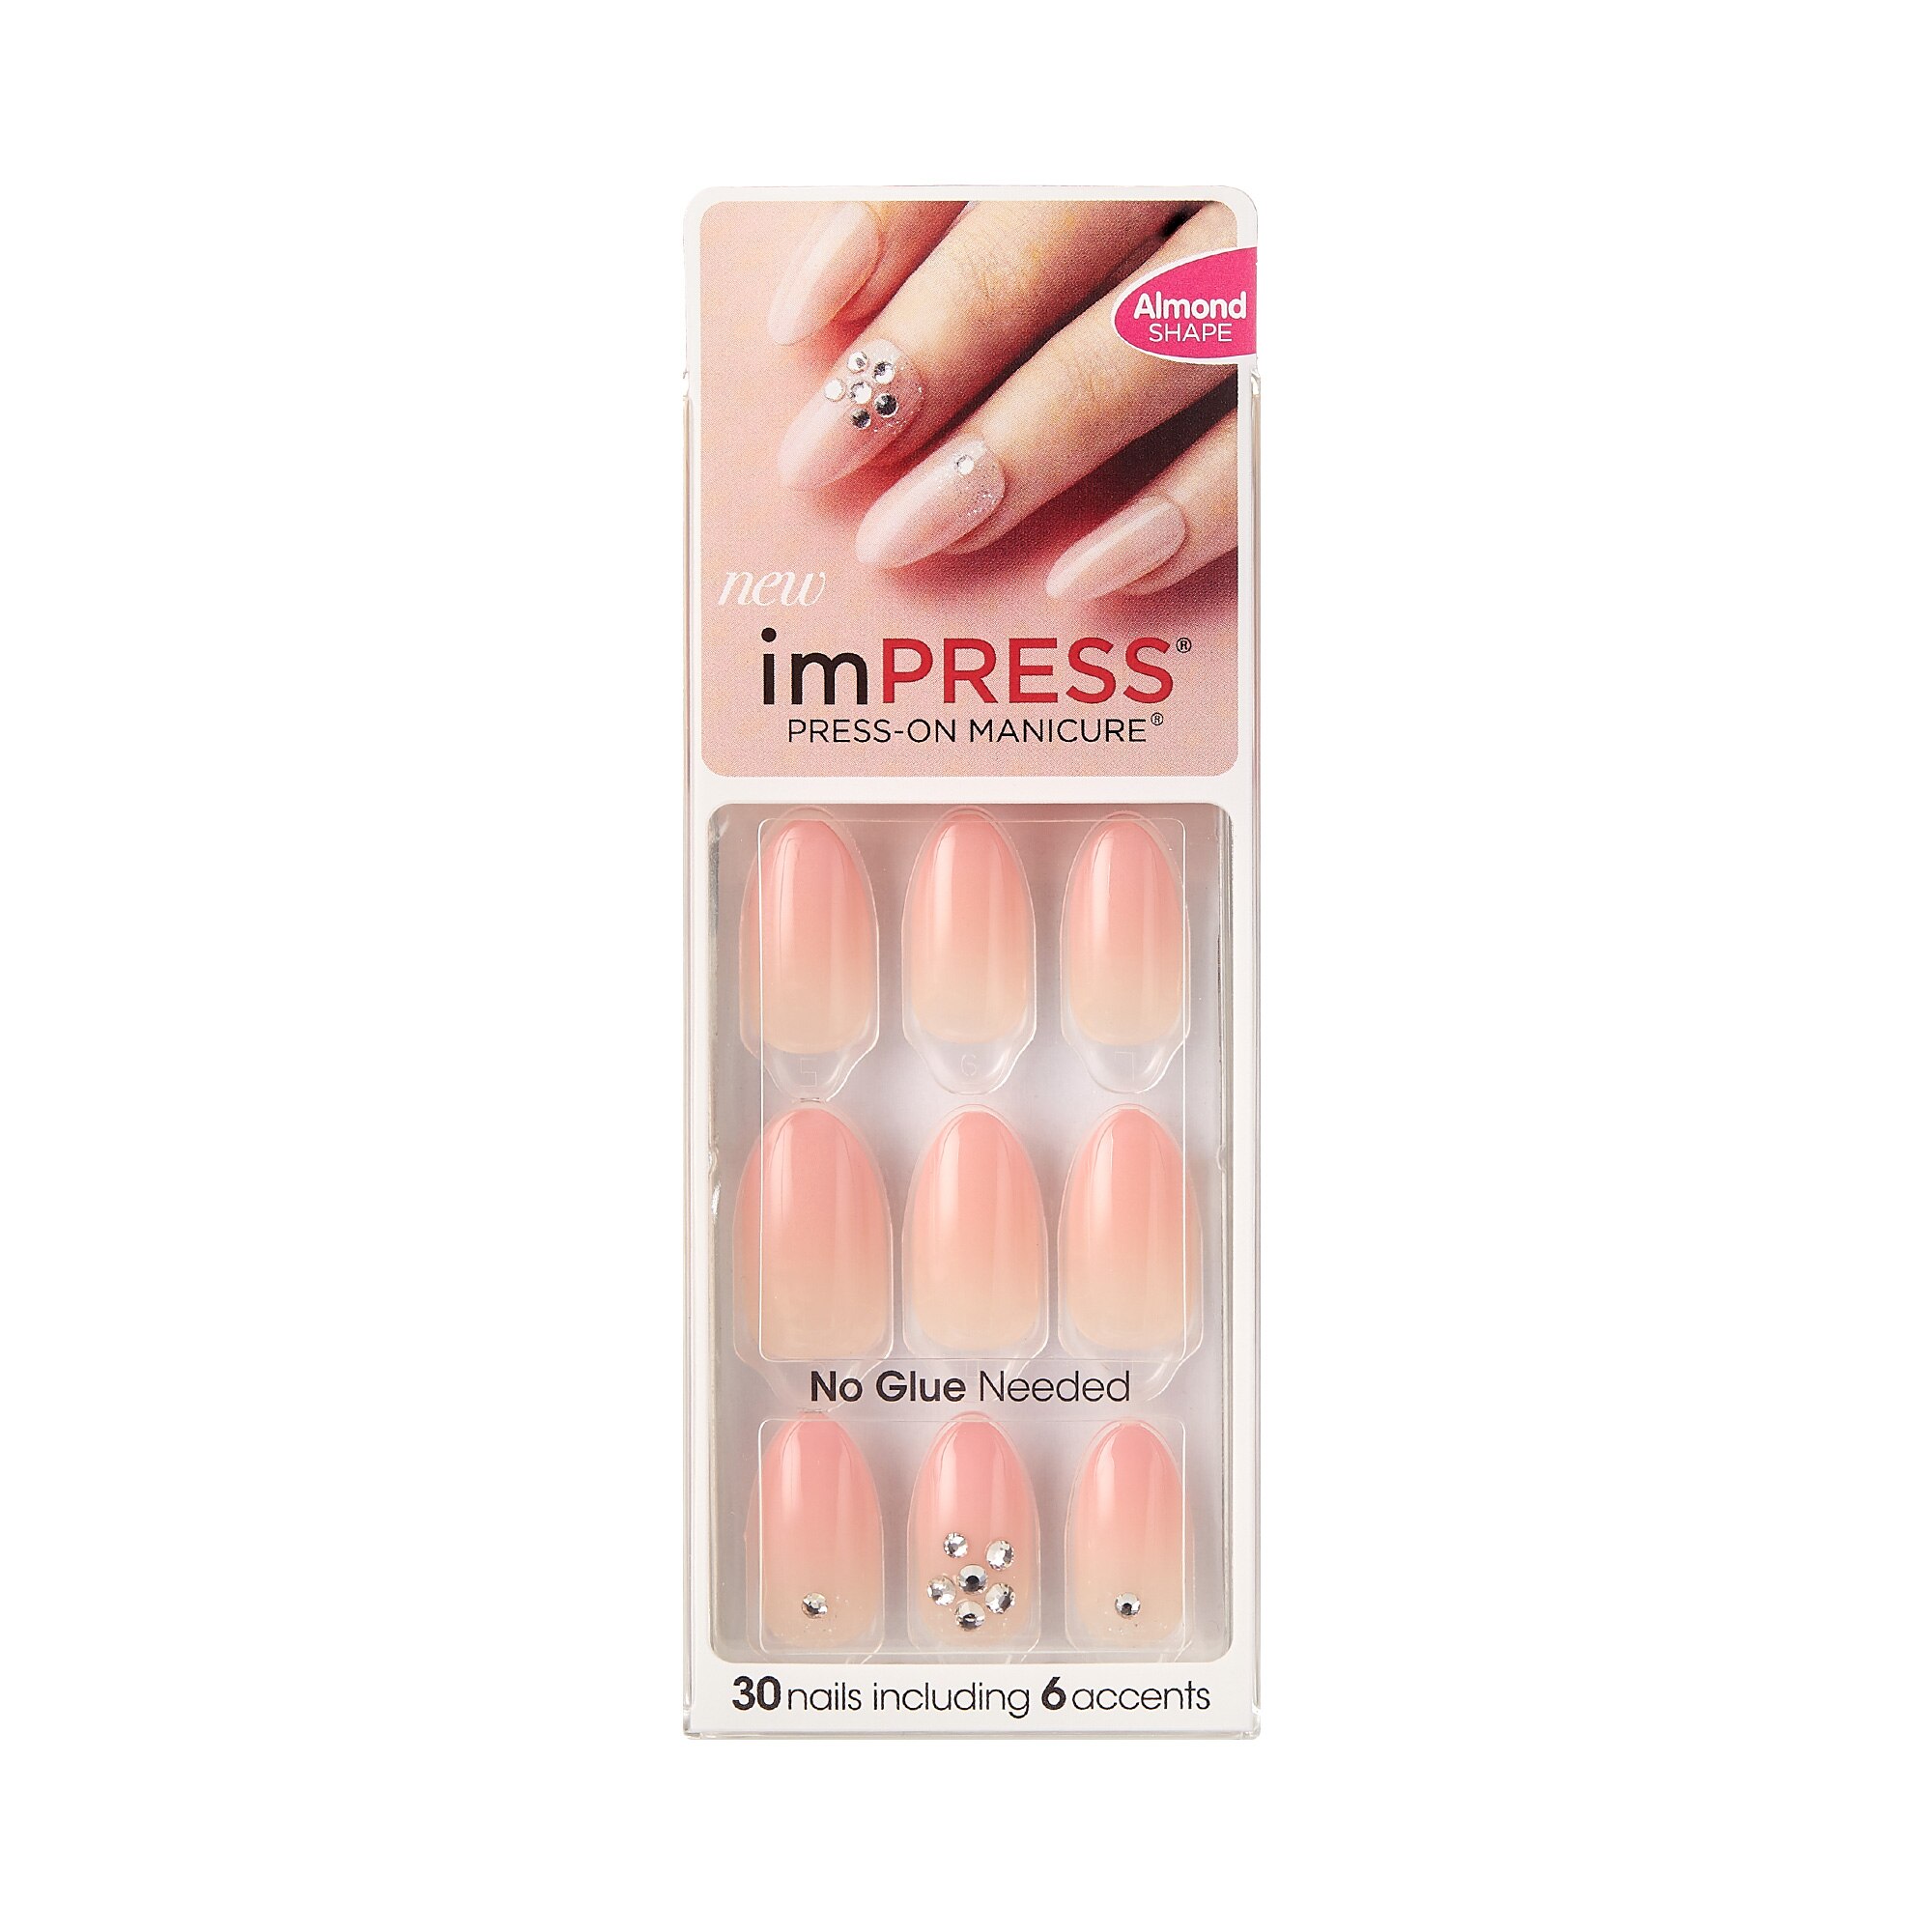 KISS imPRESS Gel Manicure | Pick Up In Store TODAY at CVS